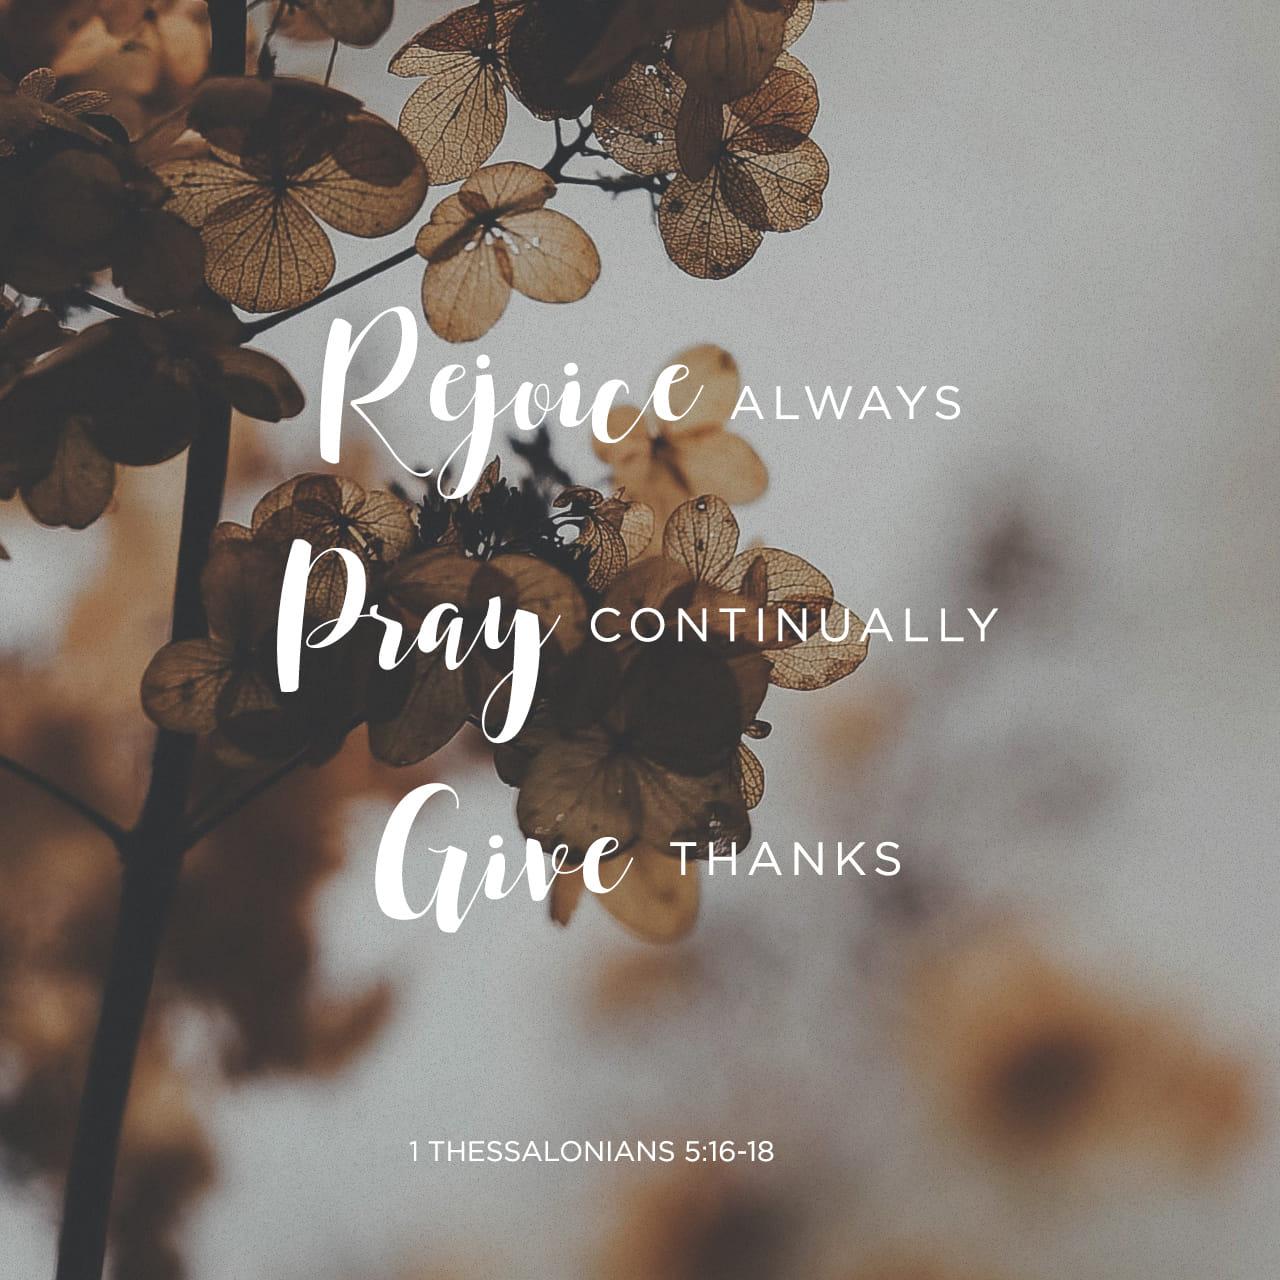 Bible Verse of the Day - day 158 - image 711 (1 Thessalonians 5:18)